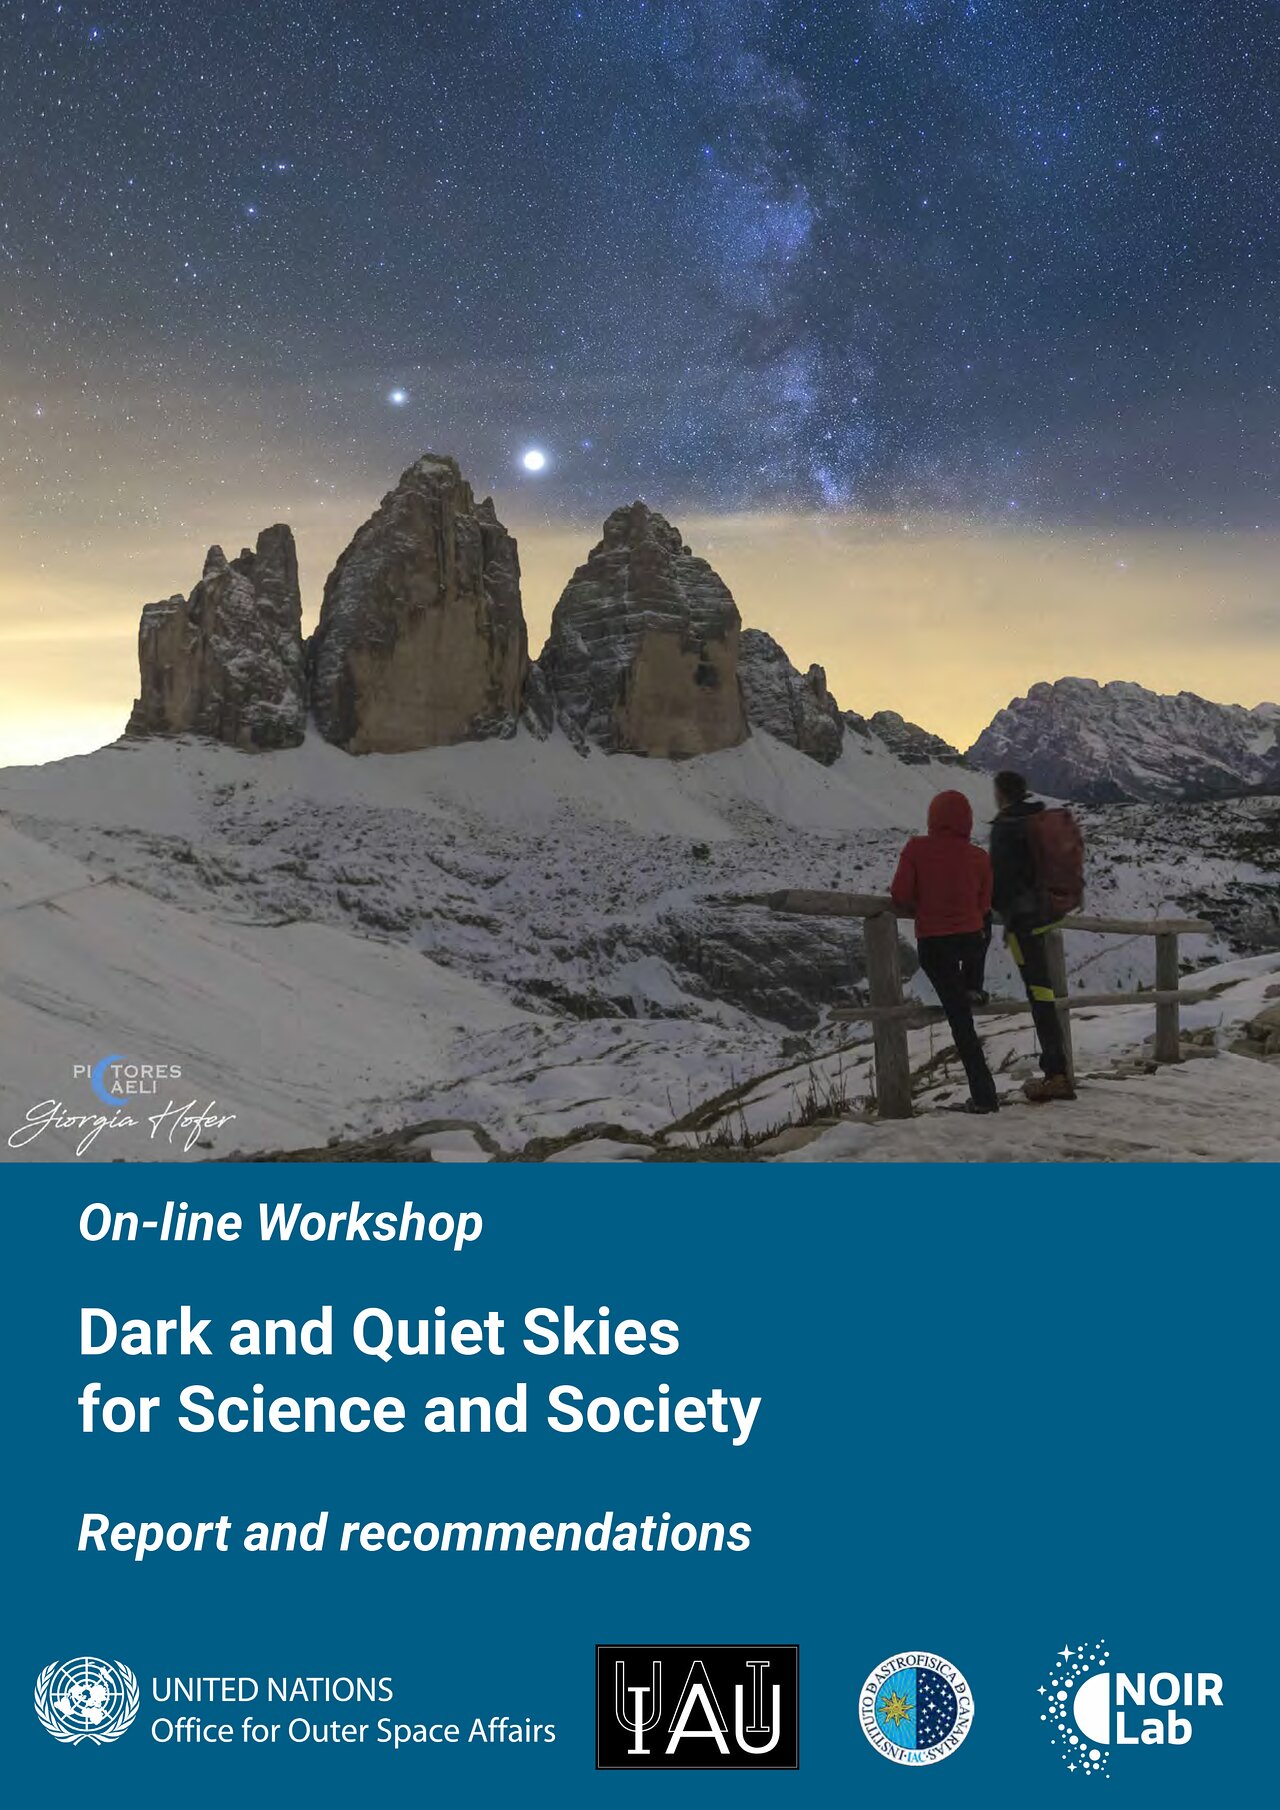 DQSkies for Science and Society. Report (PDF)